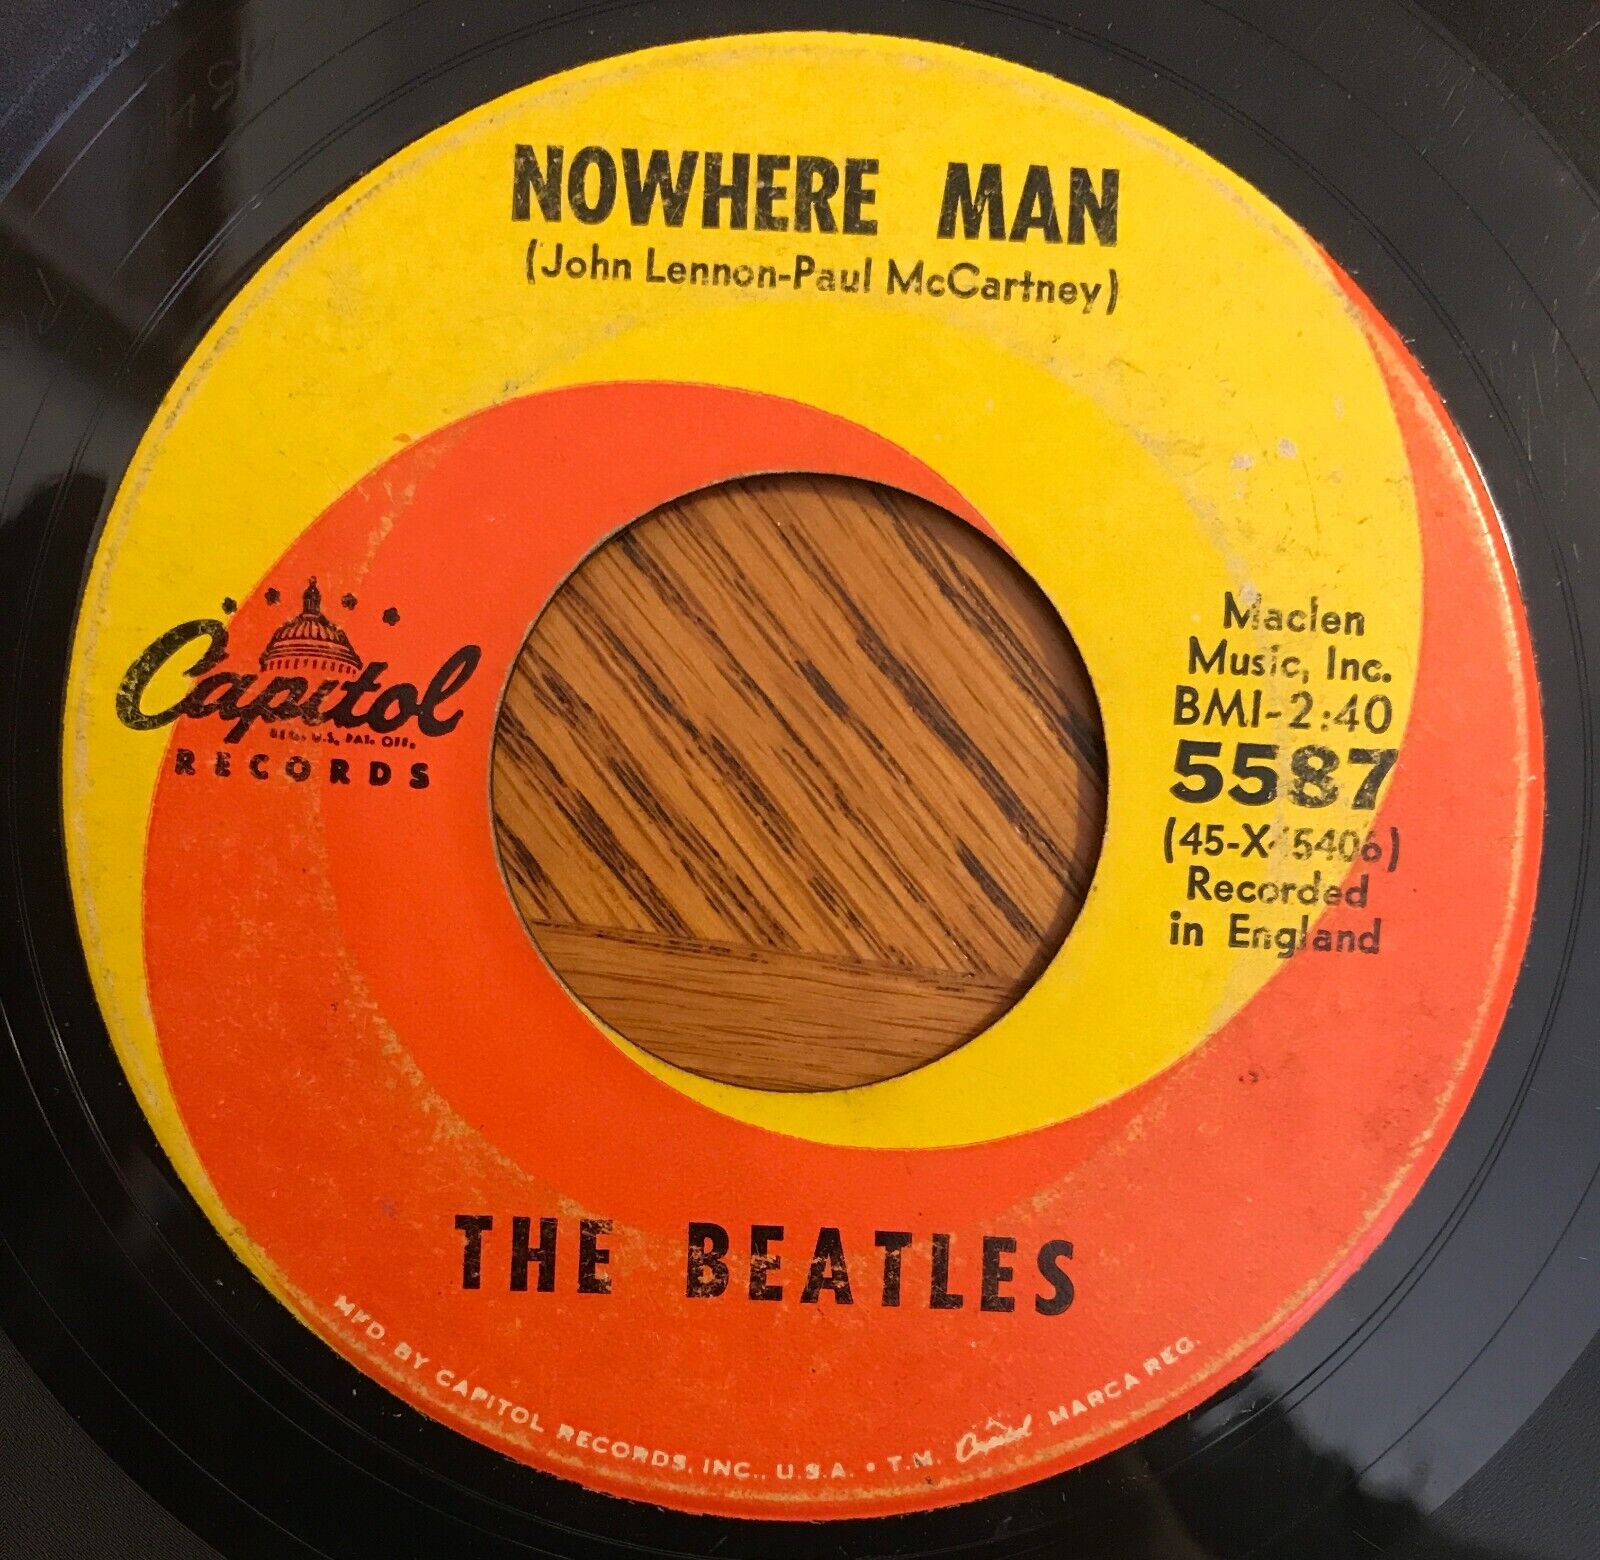 The Beatles 45 RPM - Nowhere Man / What Goes On - Capitol 5587 | eBay